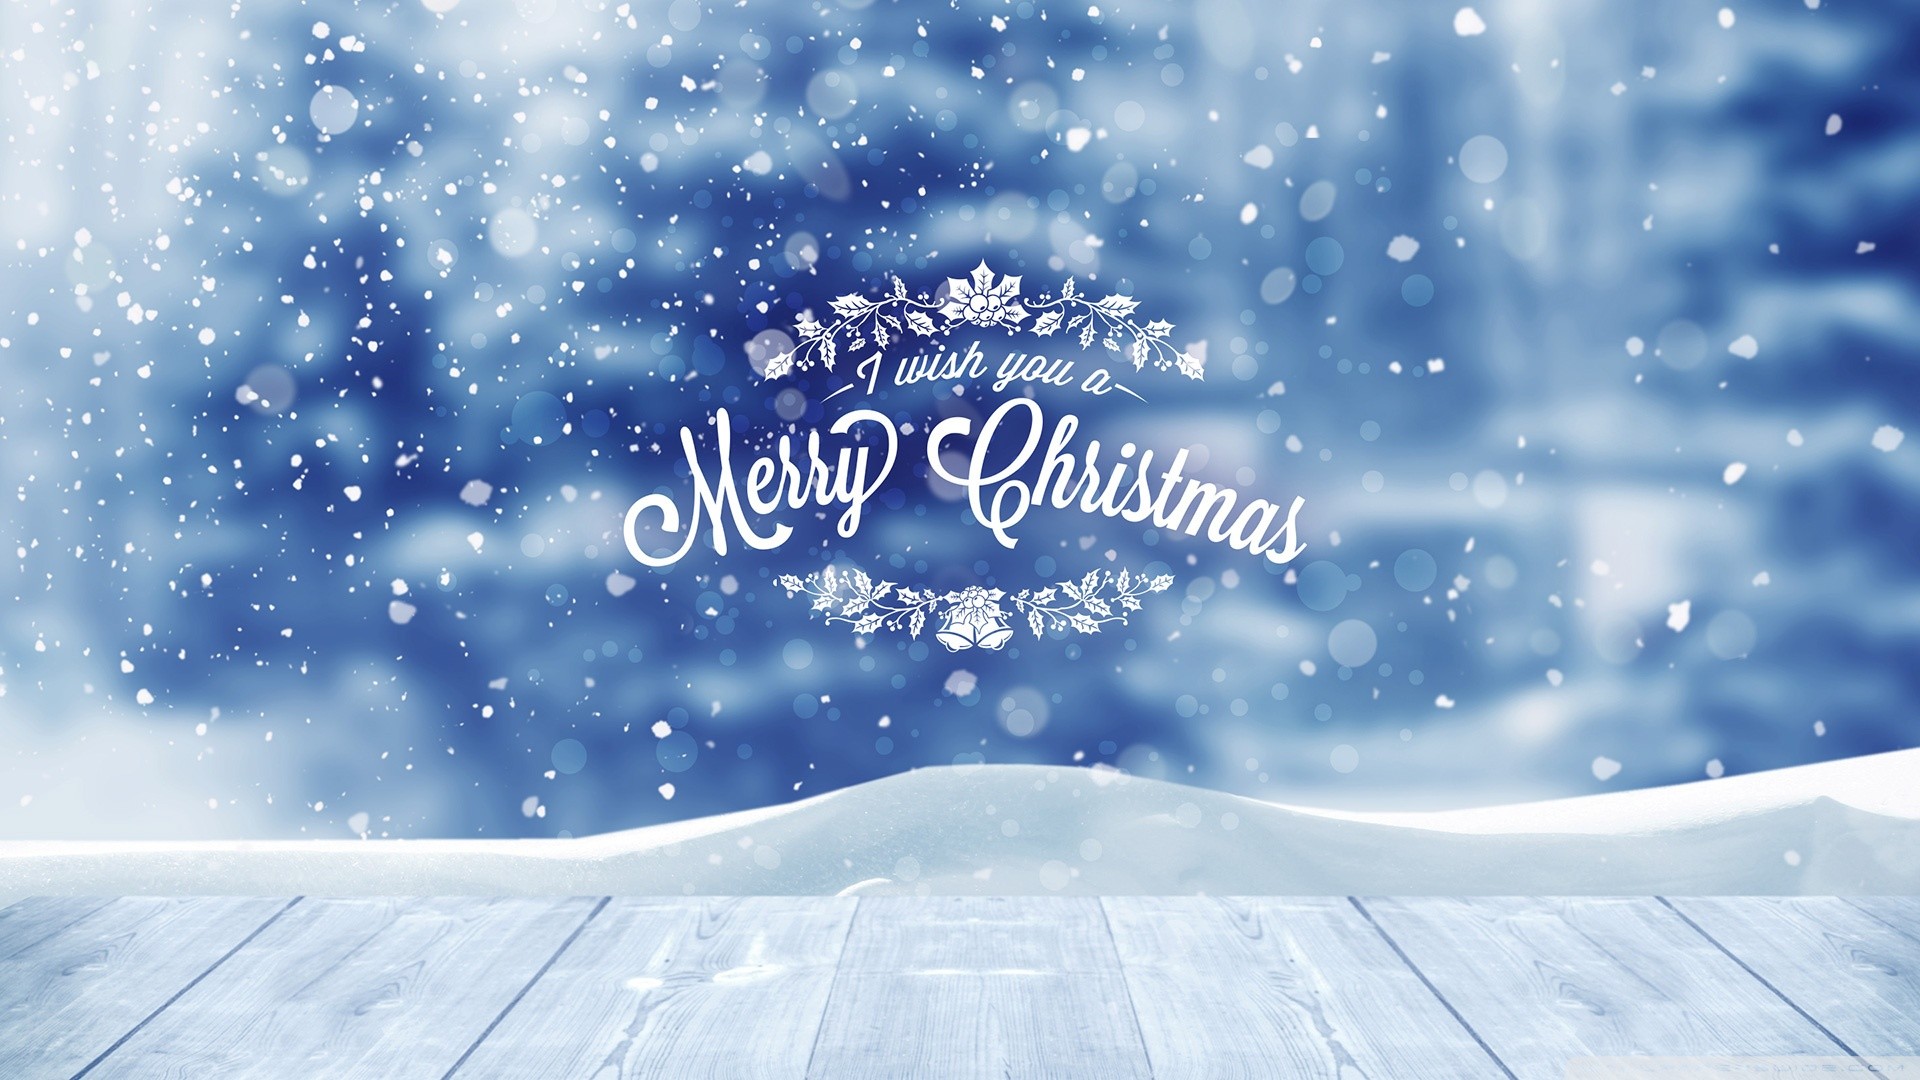 christmas wallpapers 1920x1080,blue,snow,sky,winter,text